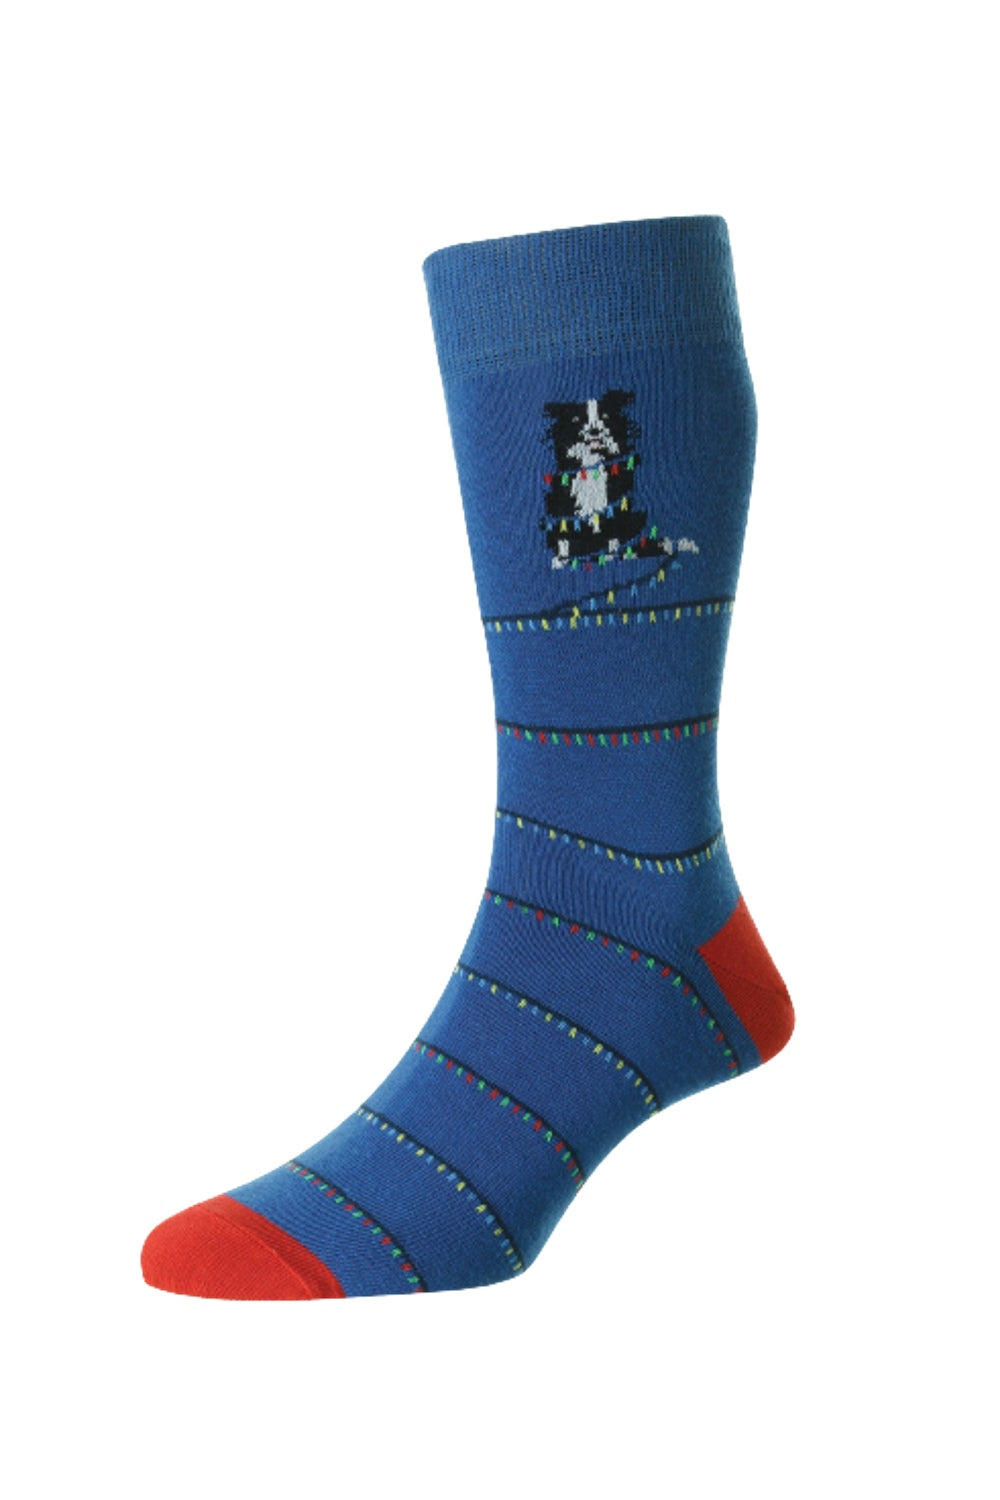 HJ Hall Dog With Christmas Lights Cotton Rich Socks in Royal Blue